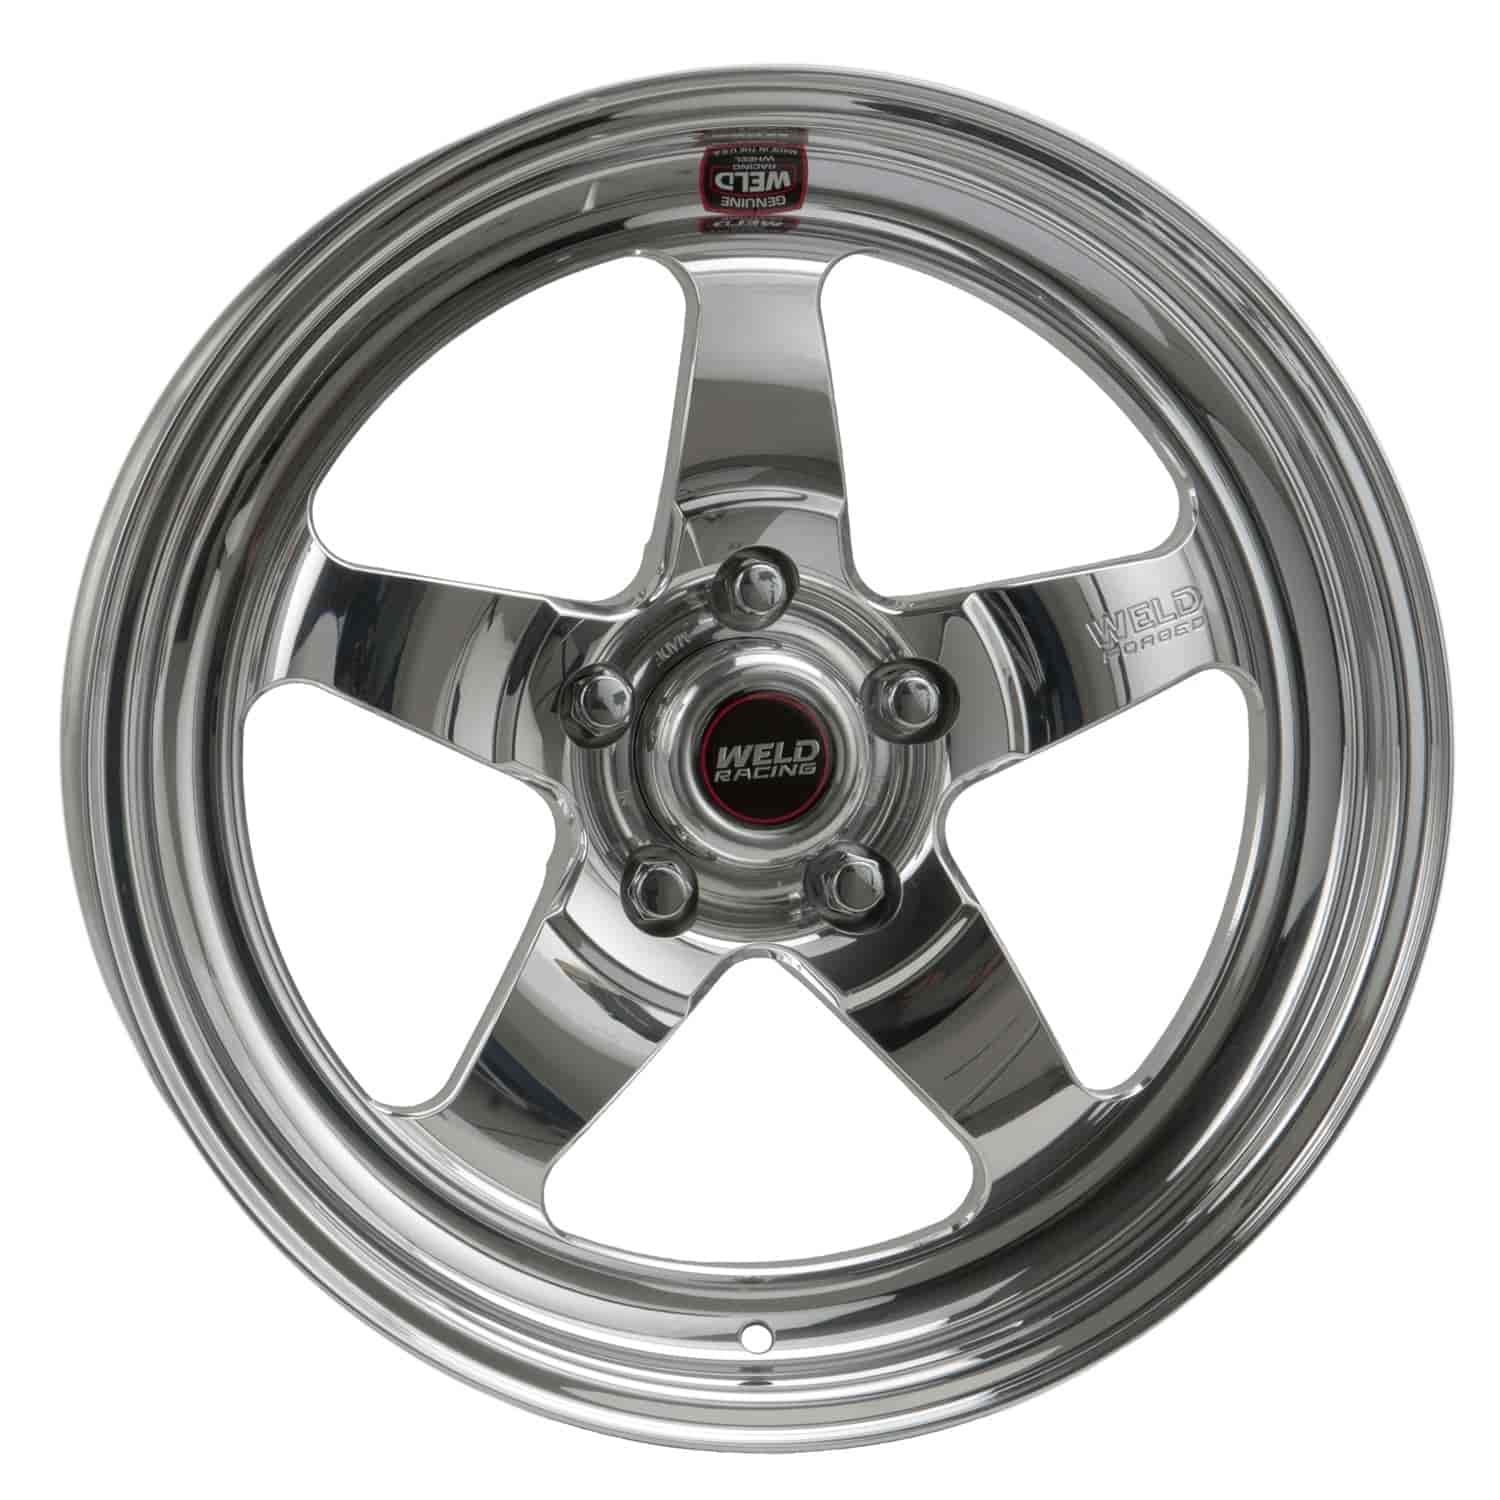 RT-S Series Wheel Size: 15" x 10" Bolt Circle: 5 x 4-3/4" Rear Spacing: 6-1/2" Offset: +21.91mm